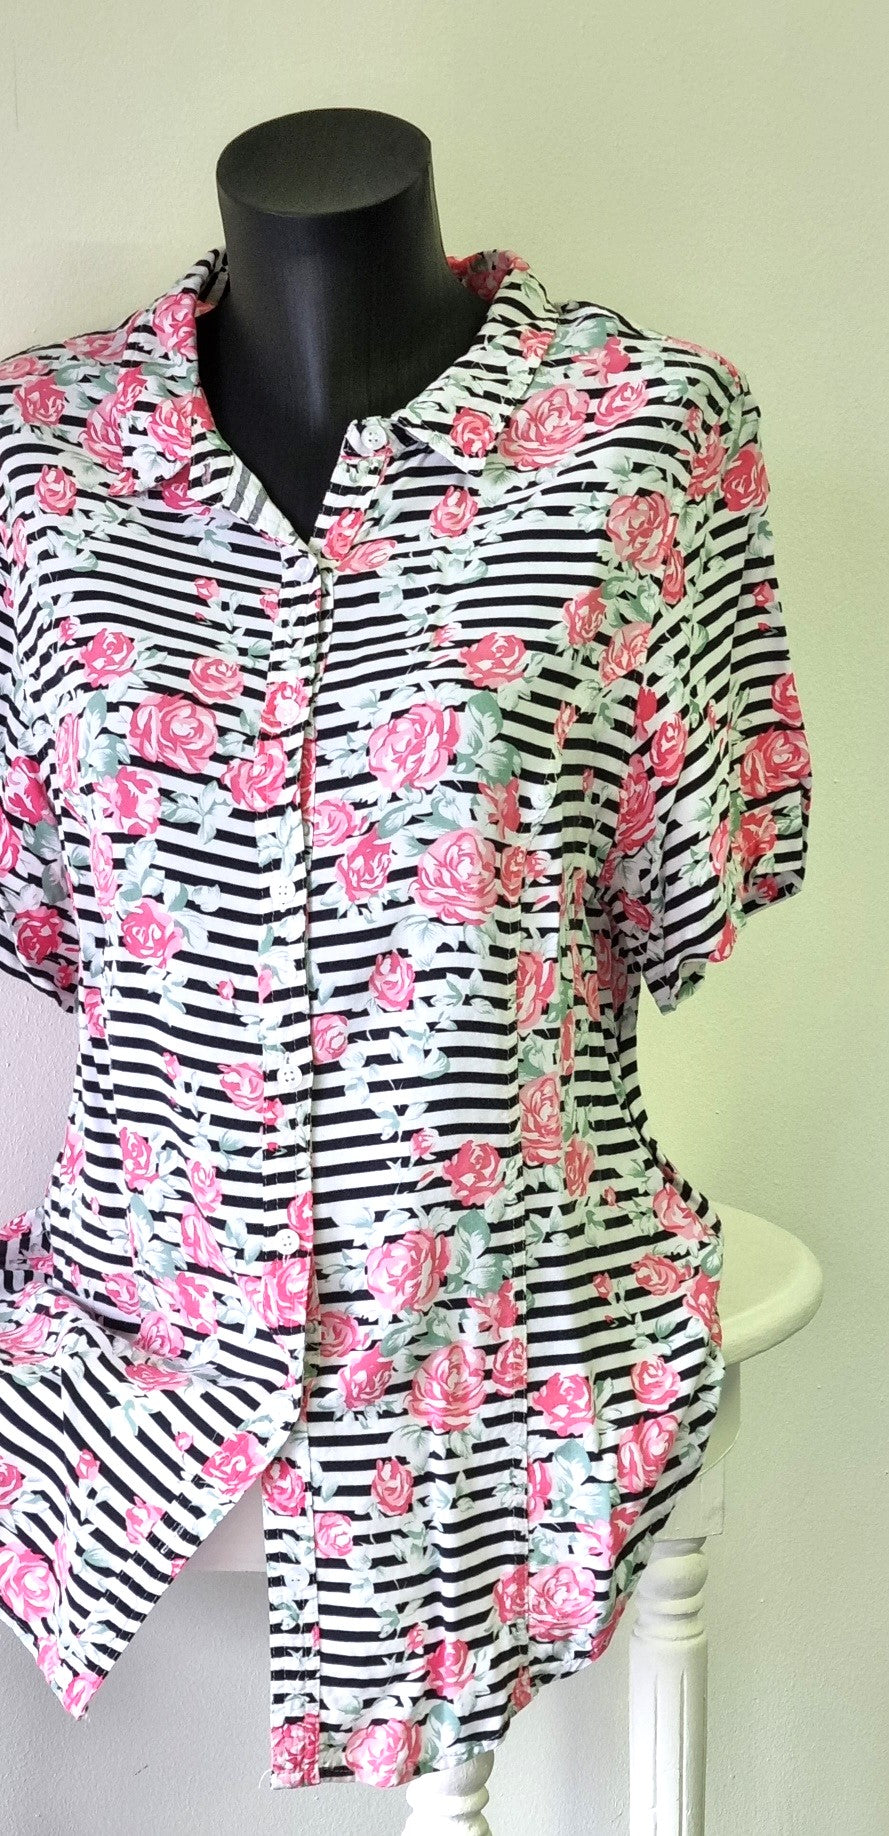 Rene Taylor - Candy pink, green and white striped summer shirt